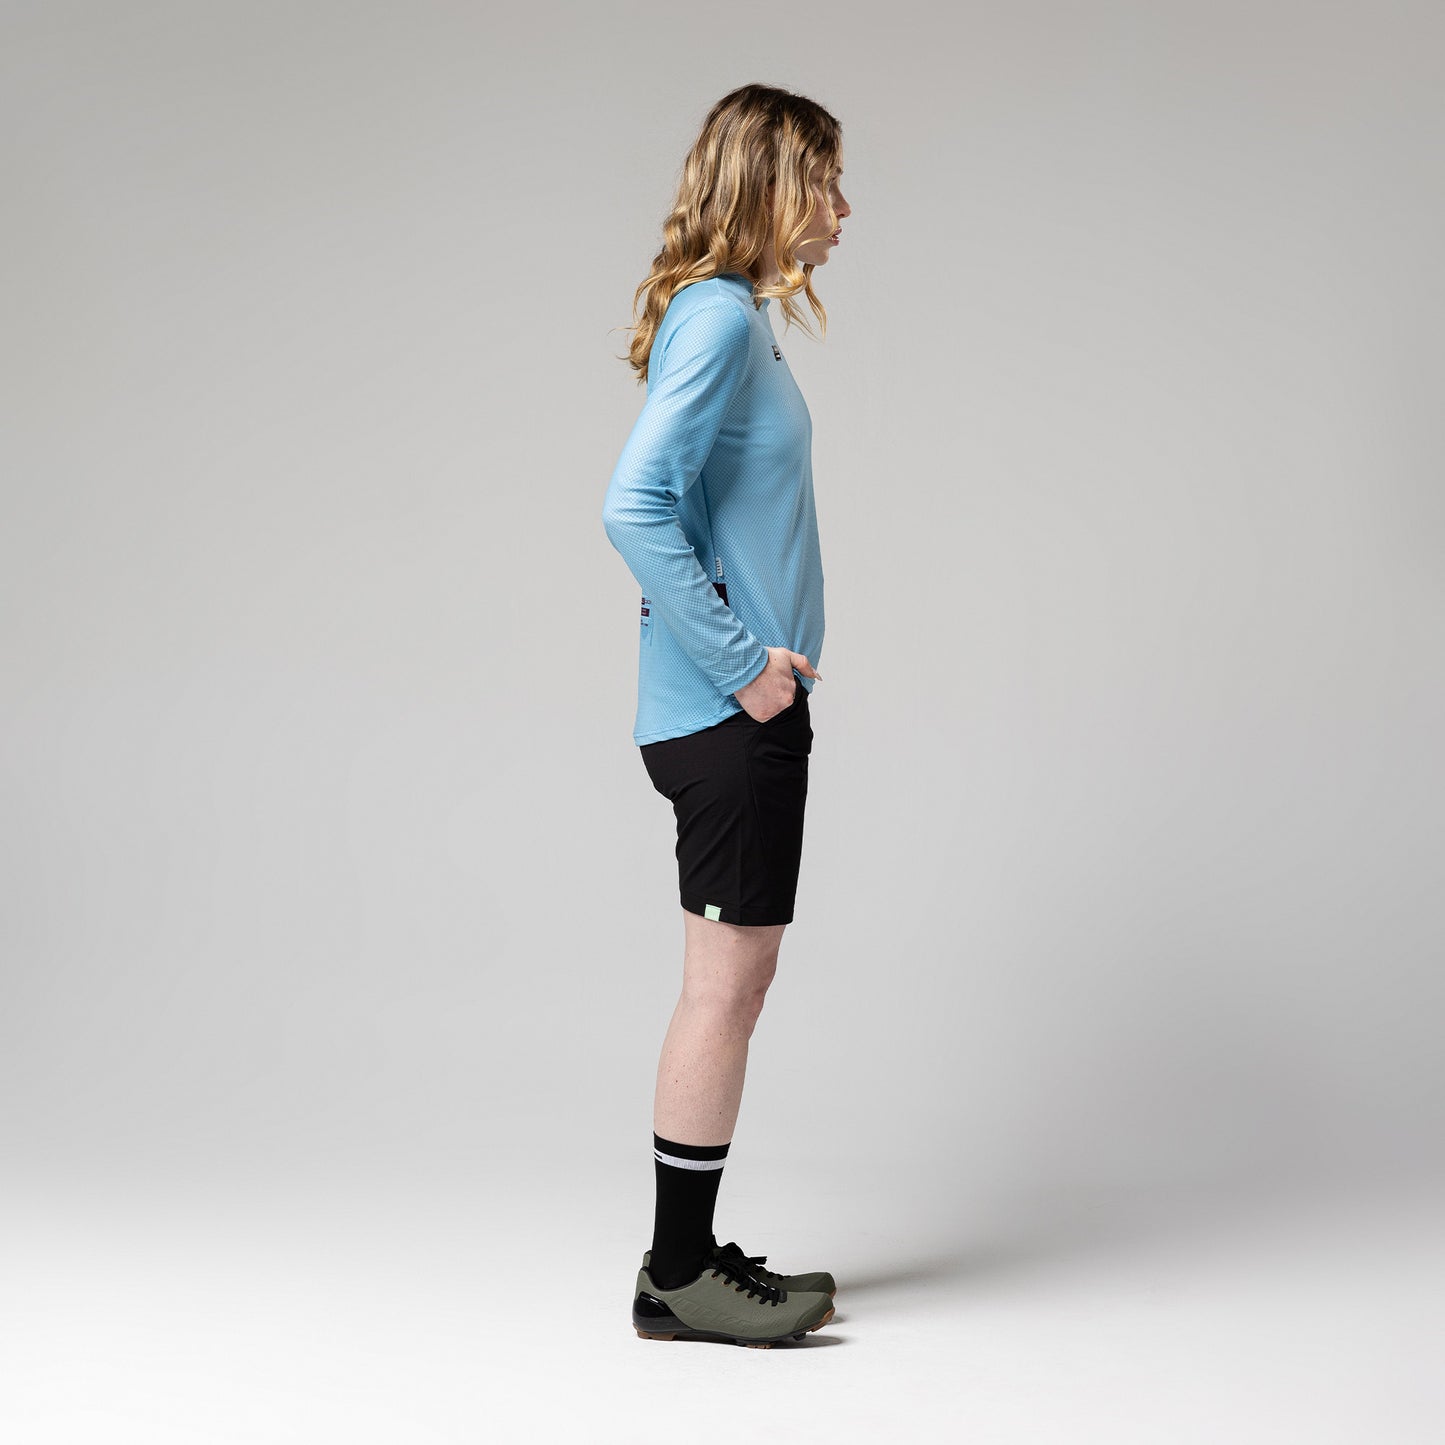 SHORTS COMMUTER MUJER BLACK